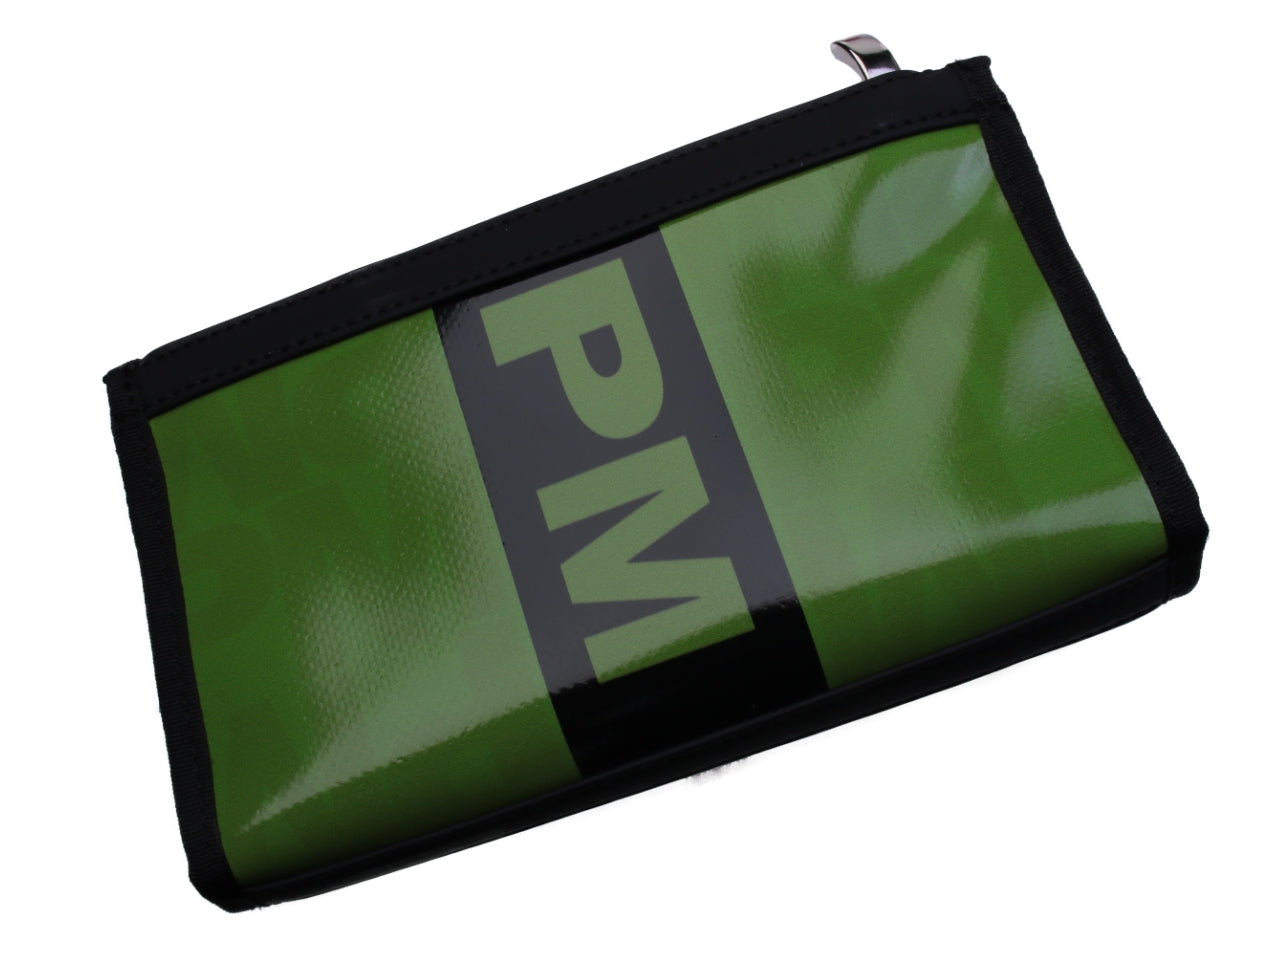 LARGE GREEN WOMEN'S WALLET WITH LETTERS. MODEL PIT MADE OF LORRY TARPAULIN. - Limited Edition Paul Meccanico